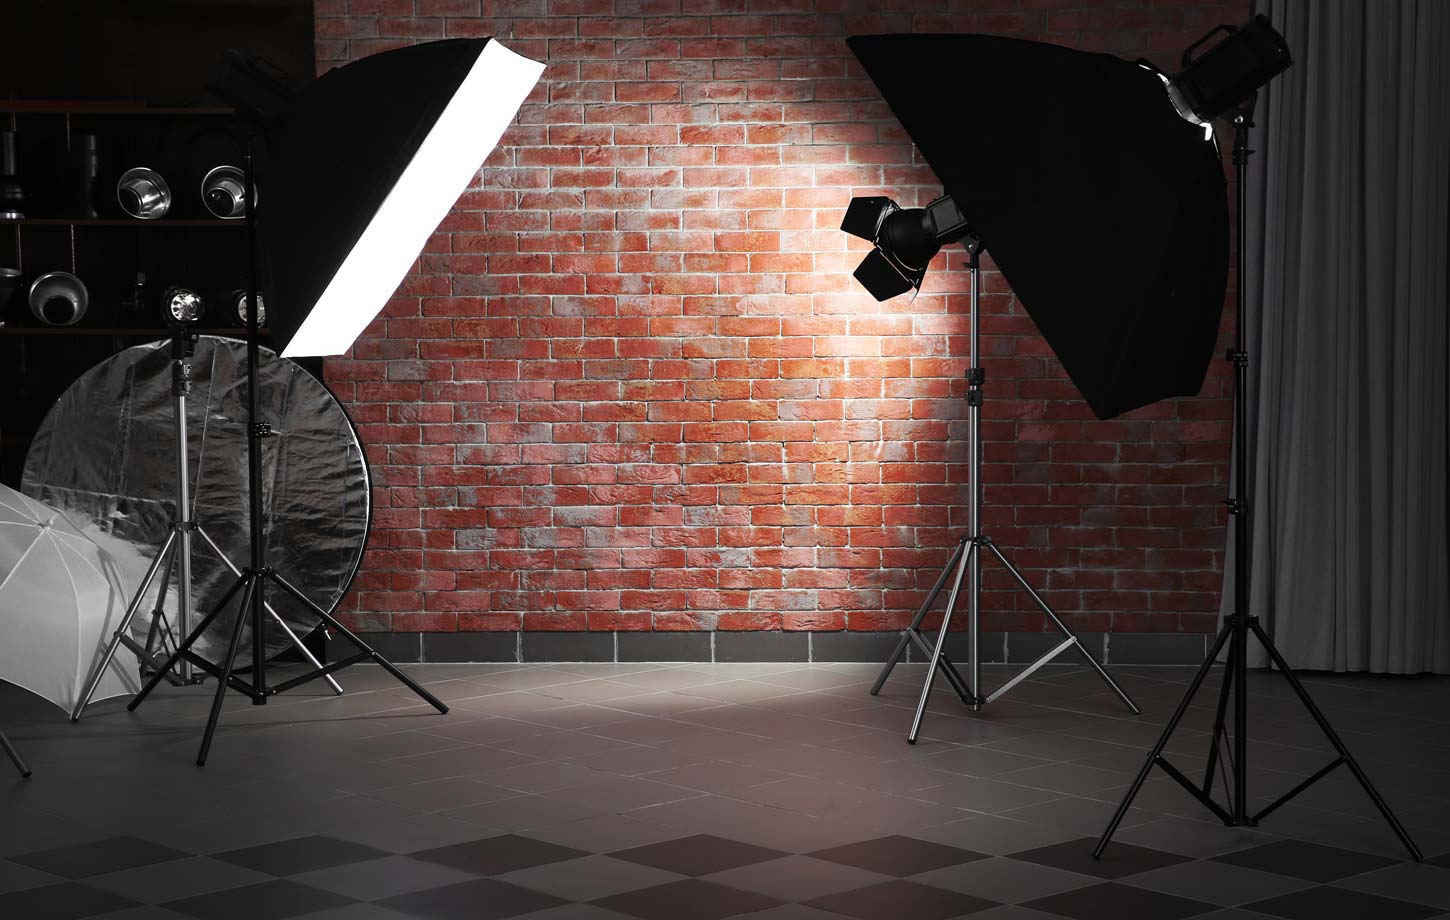 Is Operating a Photo Studio Permissible?